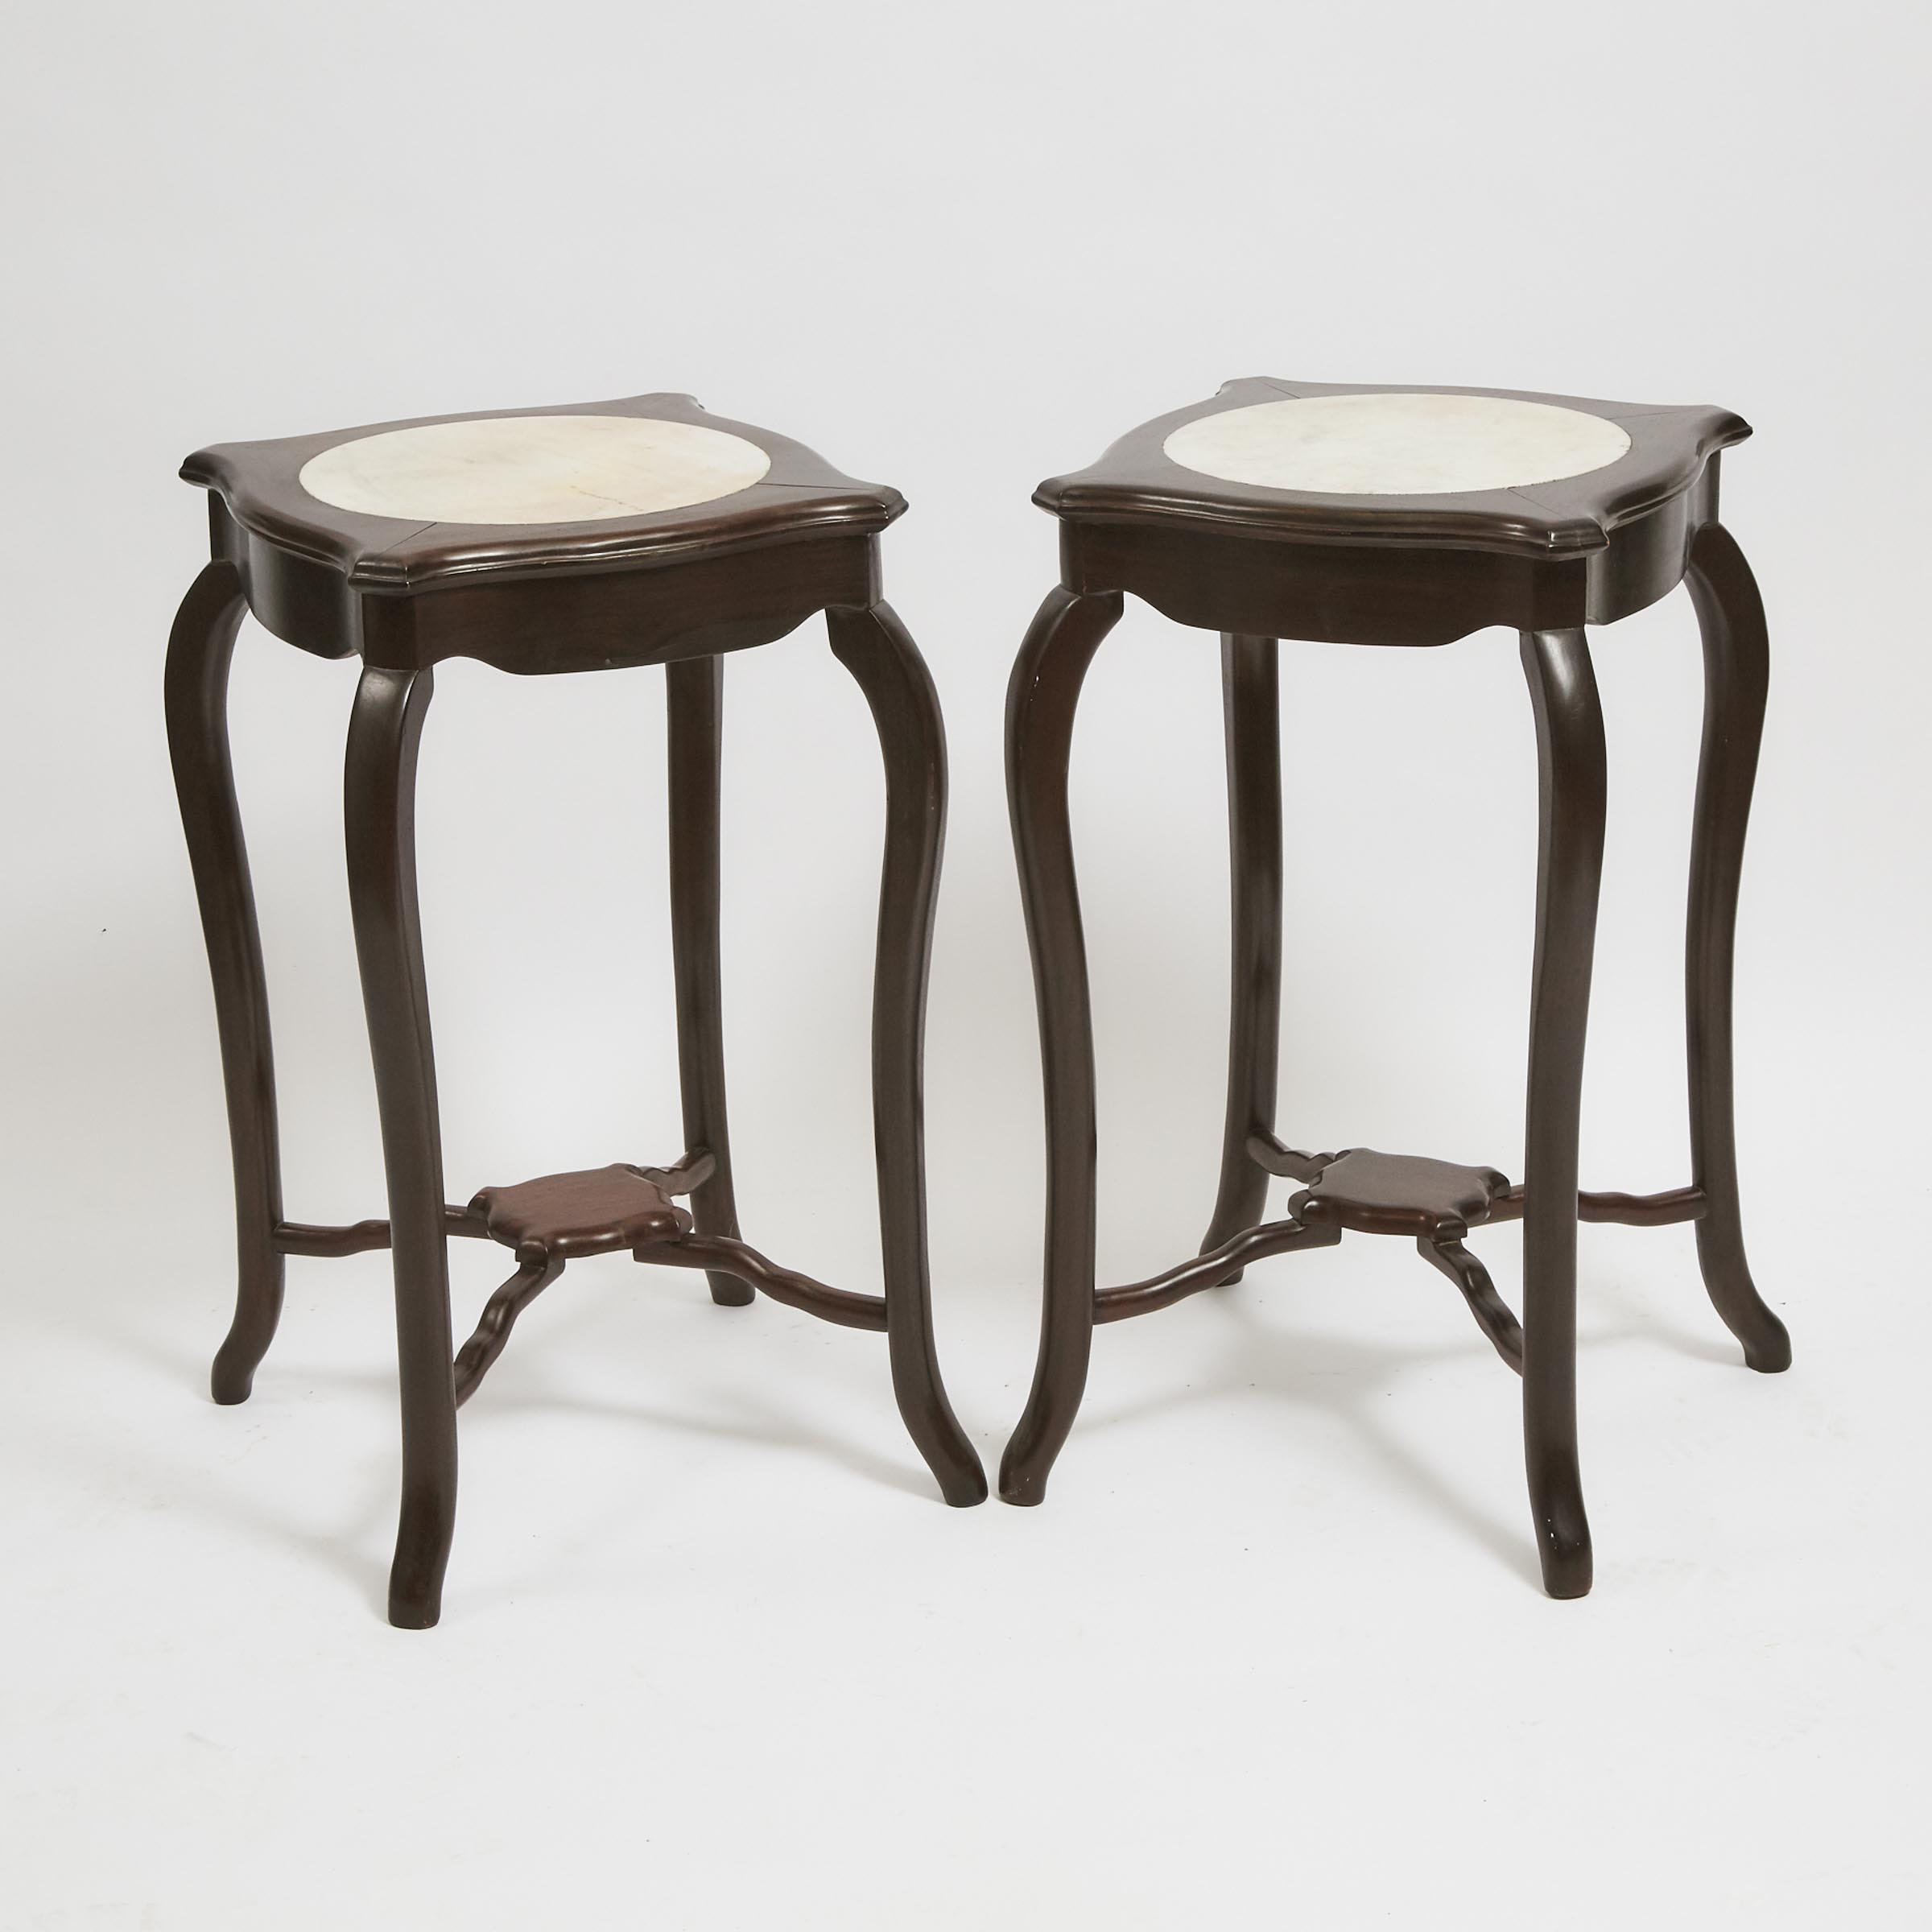 A Pair of Chinese Marble Inset Wood Stands, 19th/20th Century